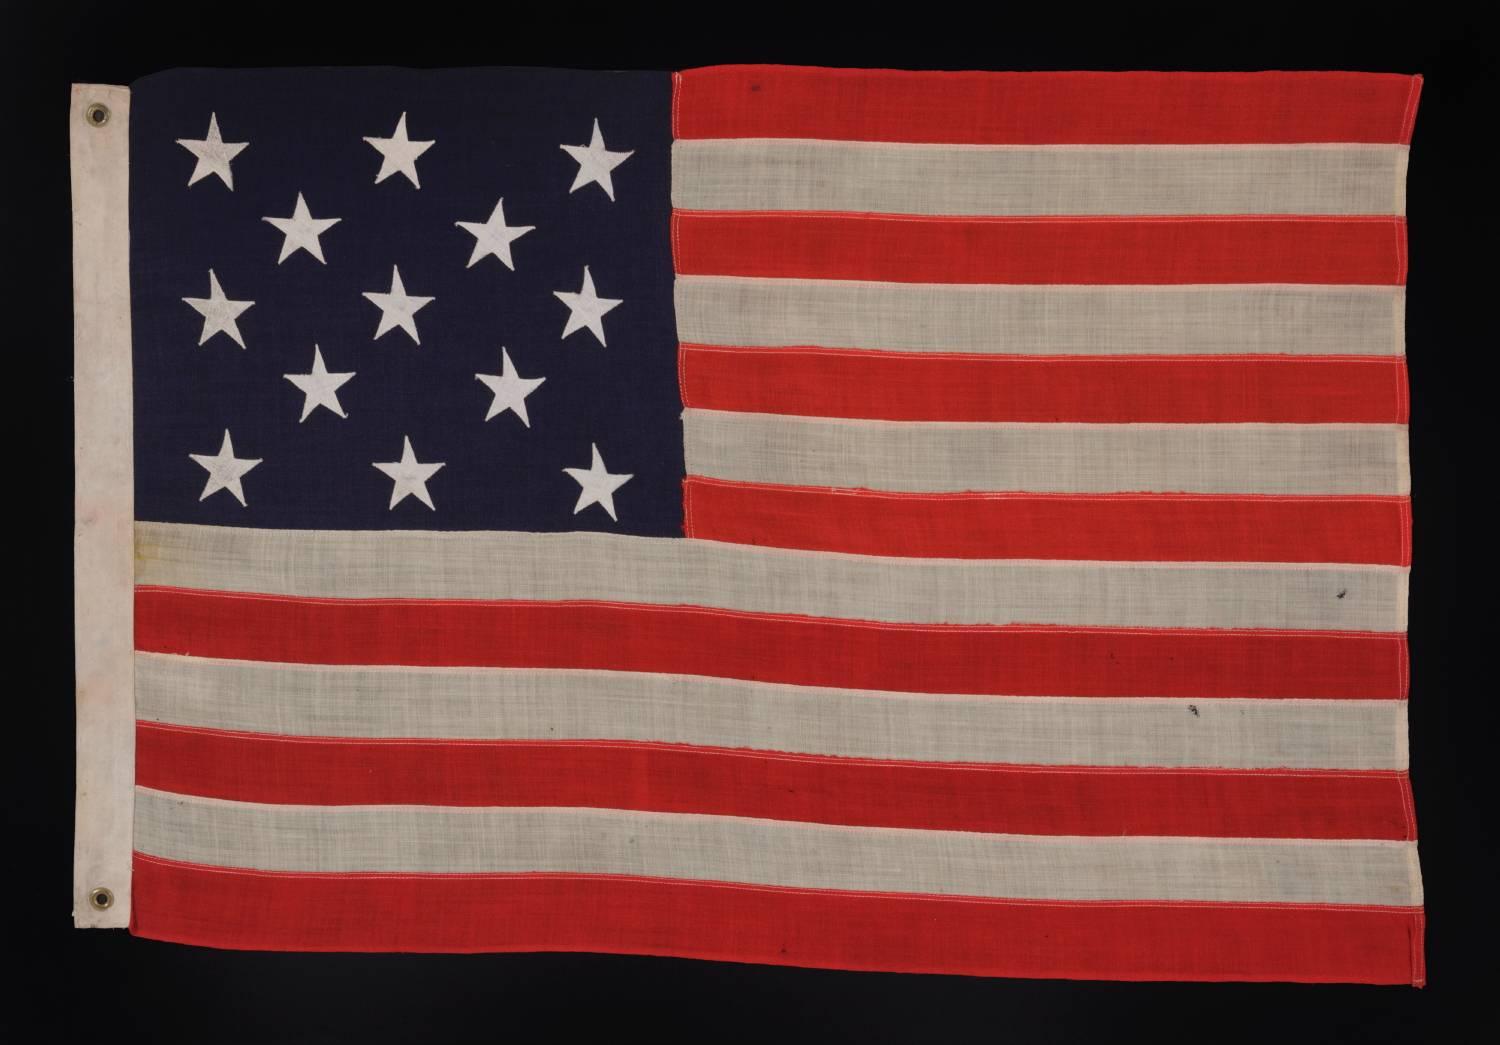 13 Stars arranged in A 3-2-3-2-3 PATTERN on a small-scale antique american flag made in the period between the last decade of the 19th century and the first quarter of the 20th:

This 13 star antique American flag is of a type made during the last